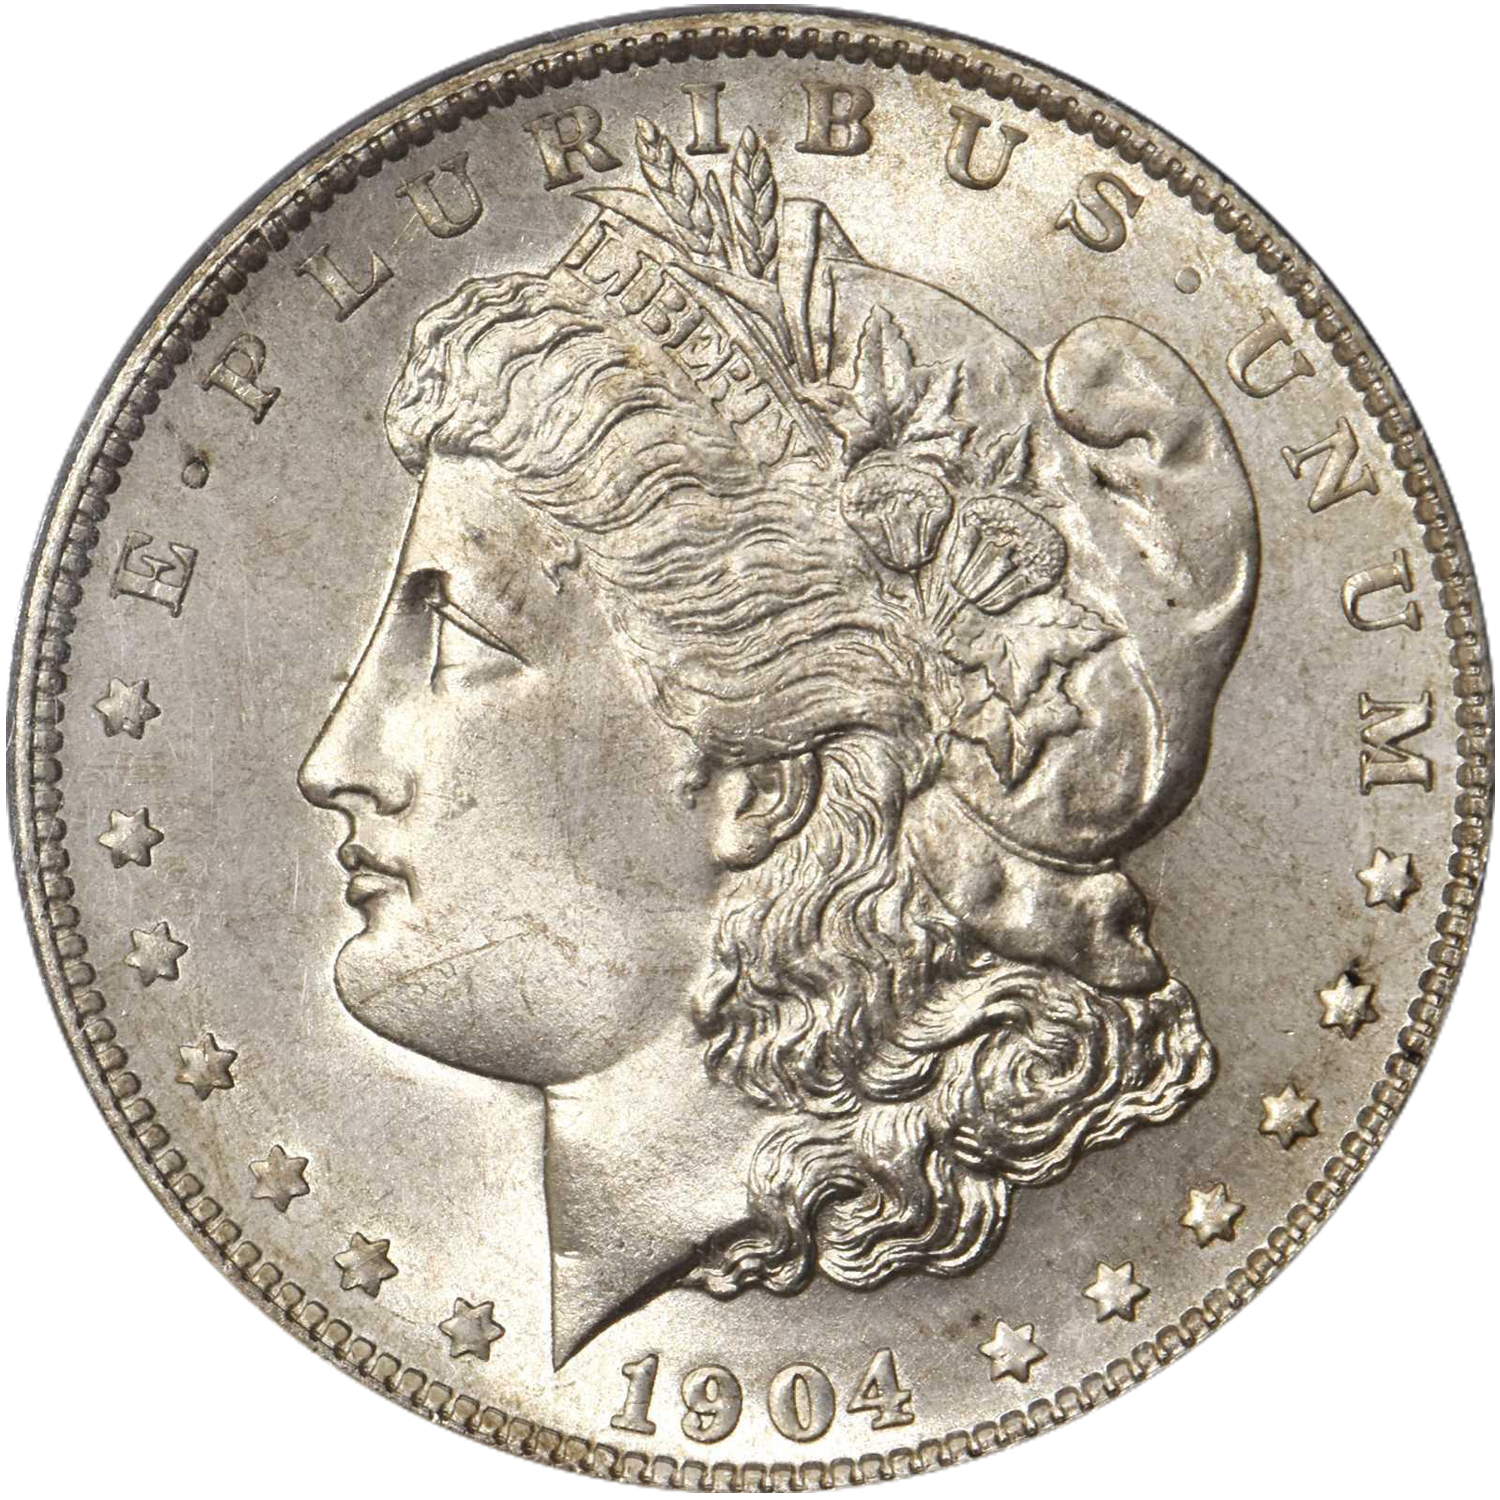 1904 s mint morgan dollar price guide value